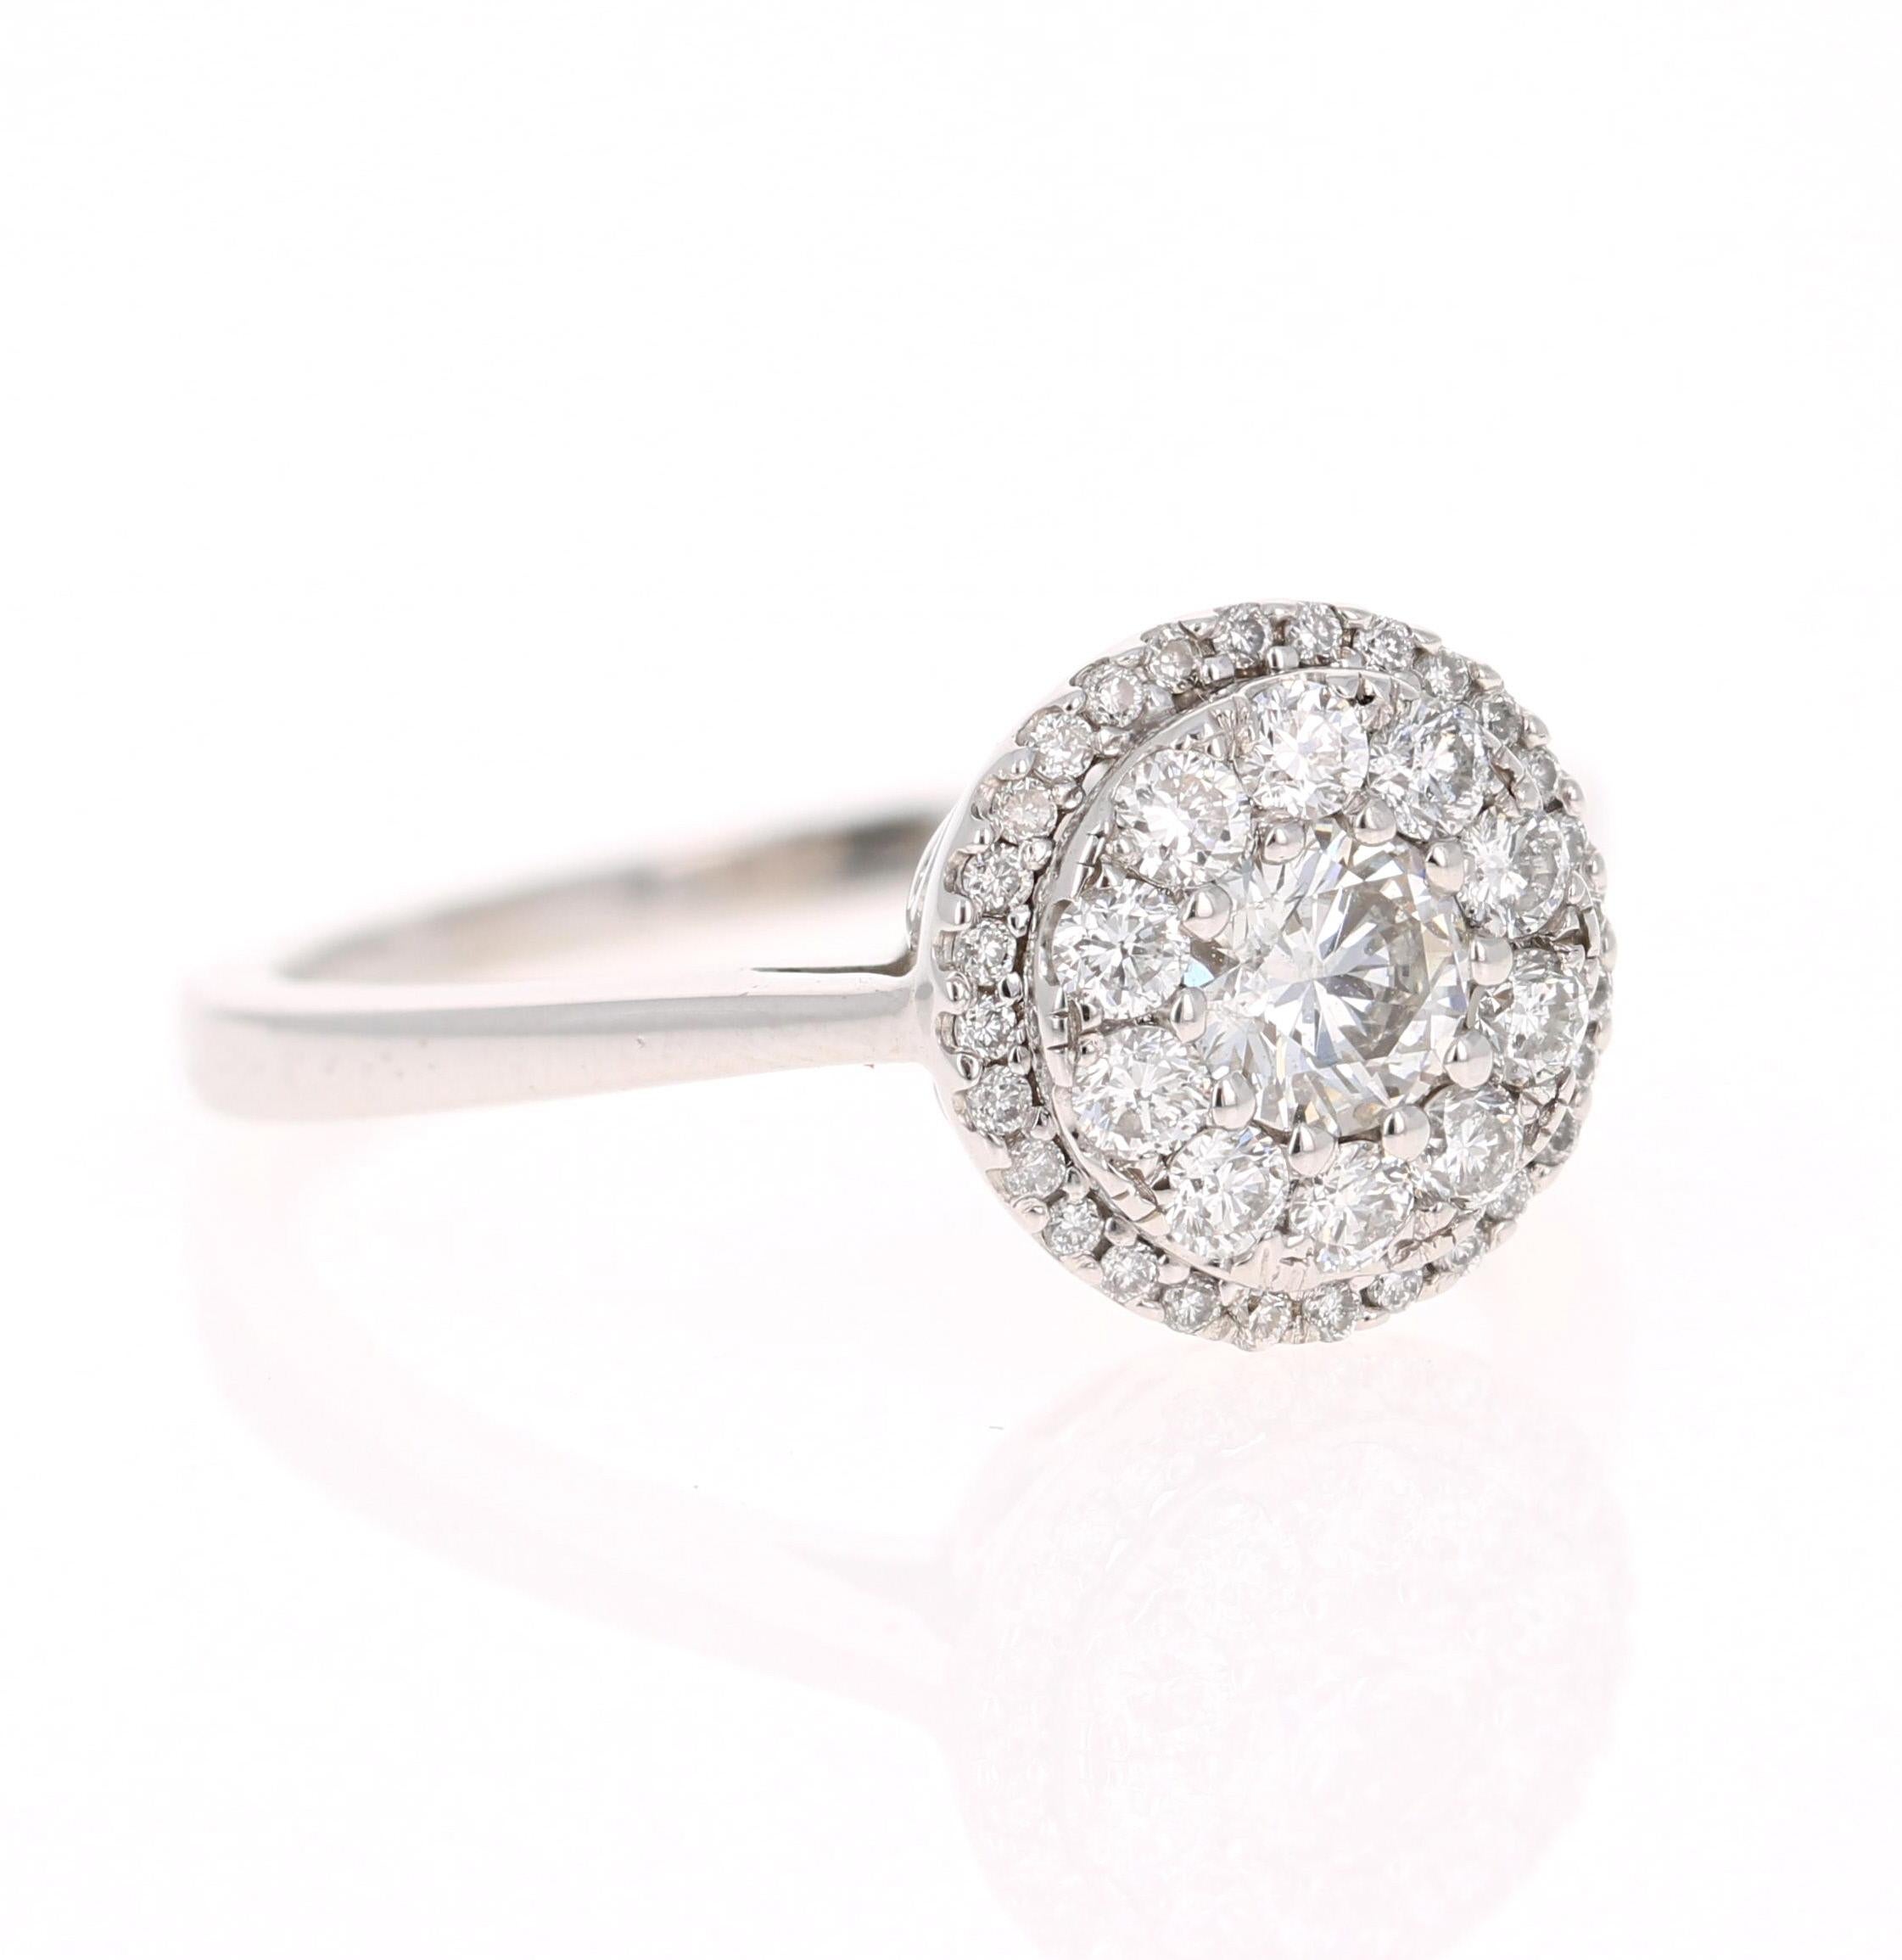 A beautiful round cut diamond ring set in a round invisible setting creating a larger look! 

This ring has 39 Round Cut Diamonds that weigh 0.73 Carats. (Clarity: VS, Color: F)

It is set in 14K White Gold and has an approximate weight of 3.2